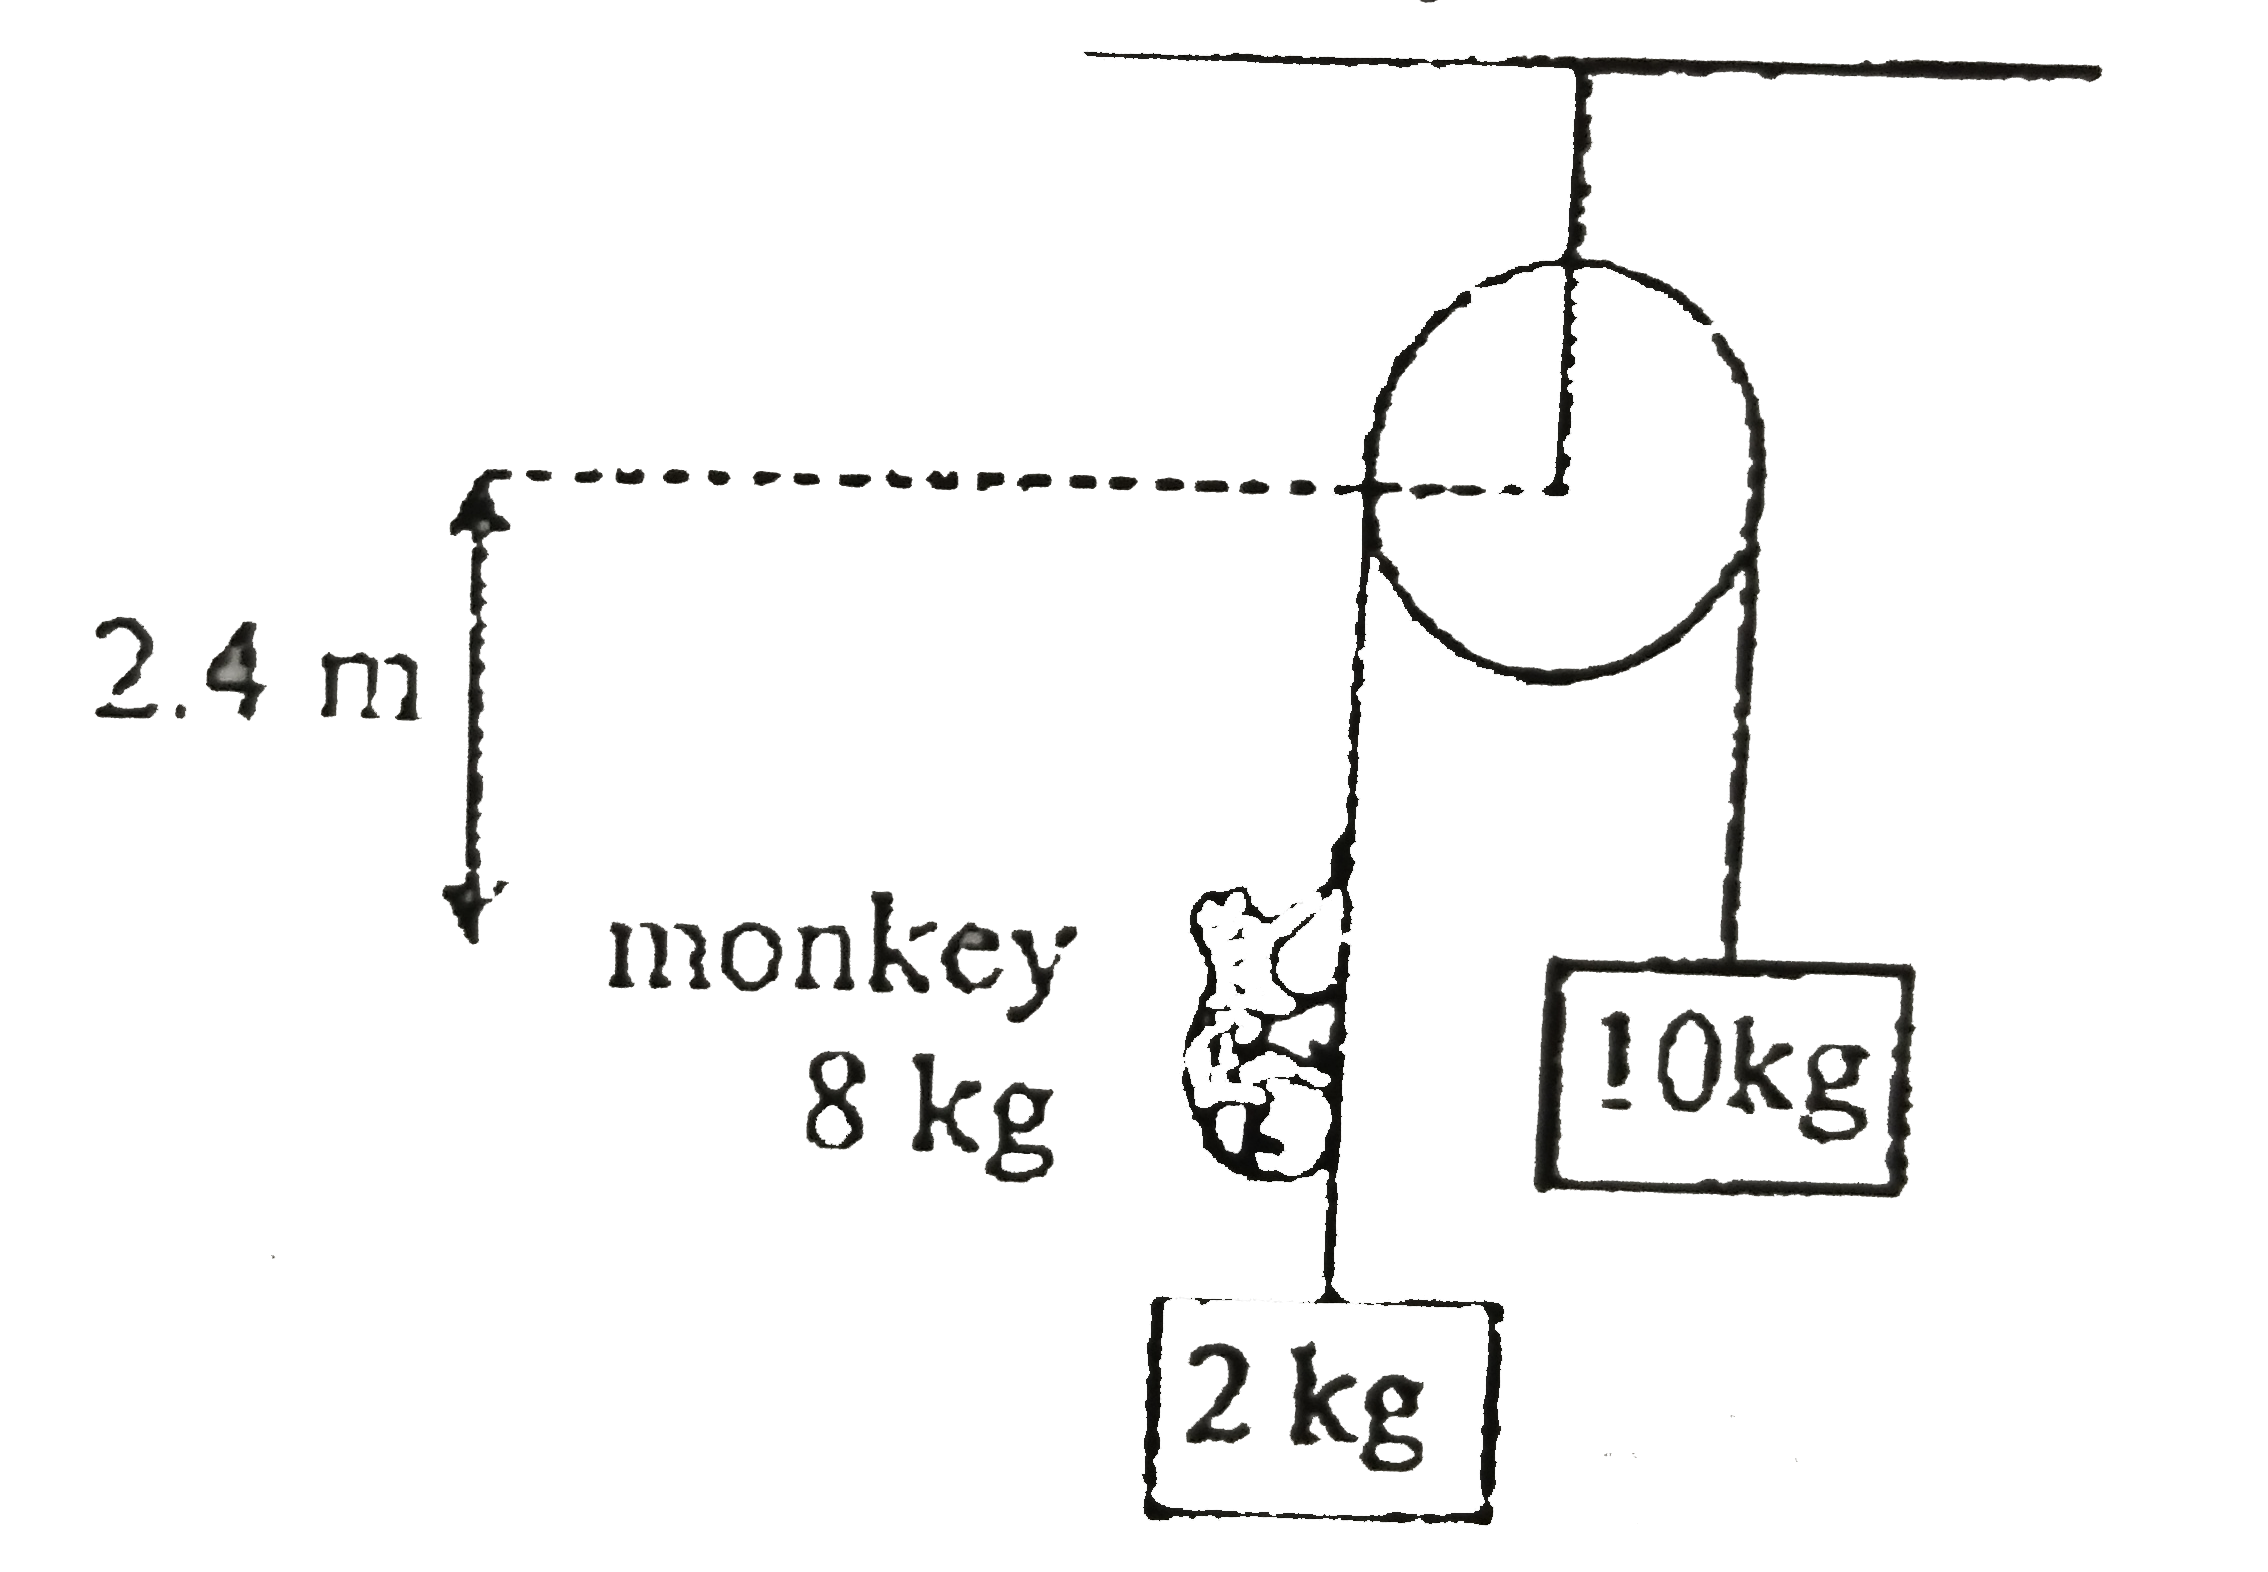 Two blocks of mass 10kg and 2kg respectively are connected by an ideal string passing over a fixed smooth pulley as shown in figure. A monkey of 8kg started climbing the string with constant acceleration 2ms^(-2) with respect to string at t=0. Initially the monkey is 2.4m from the pulley. Find the time taken by the monkey to reach the pulley.